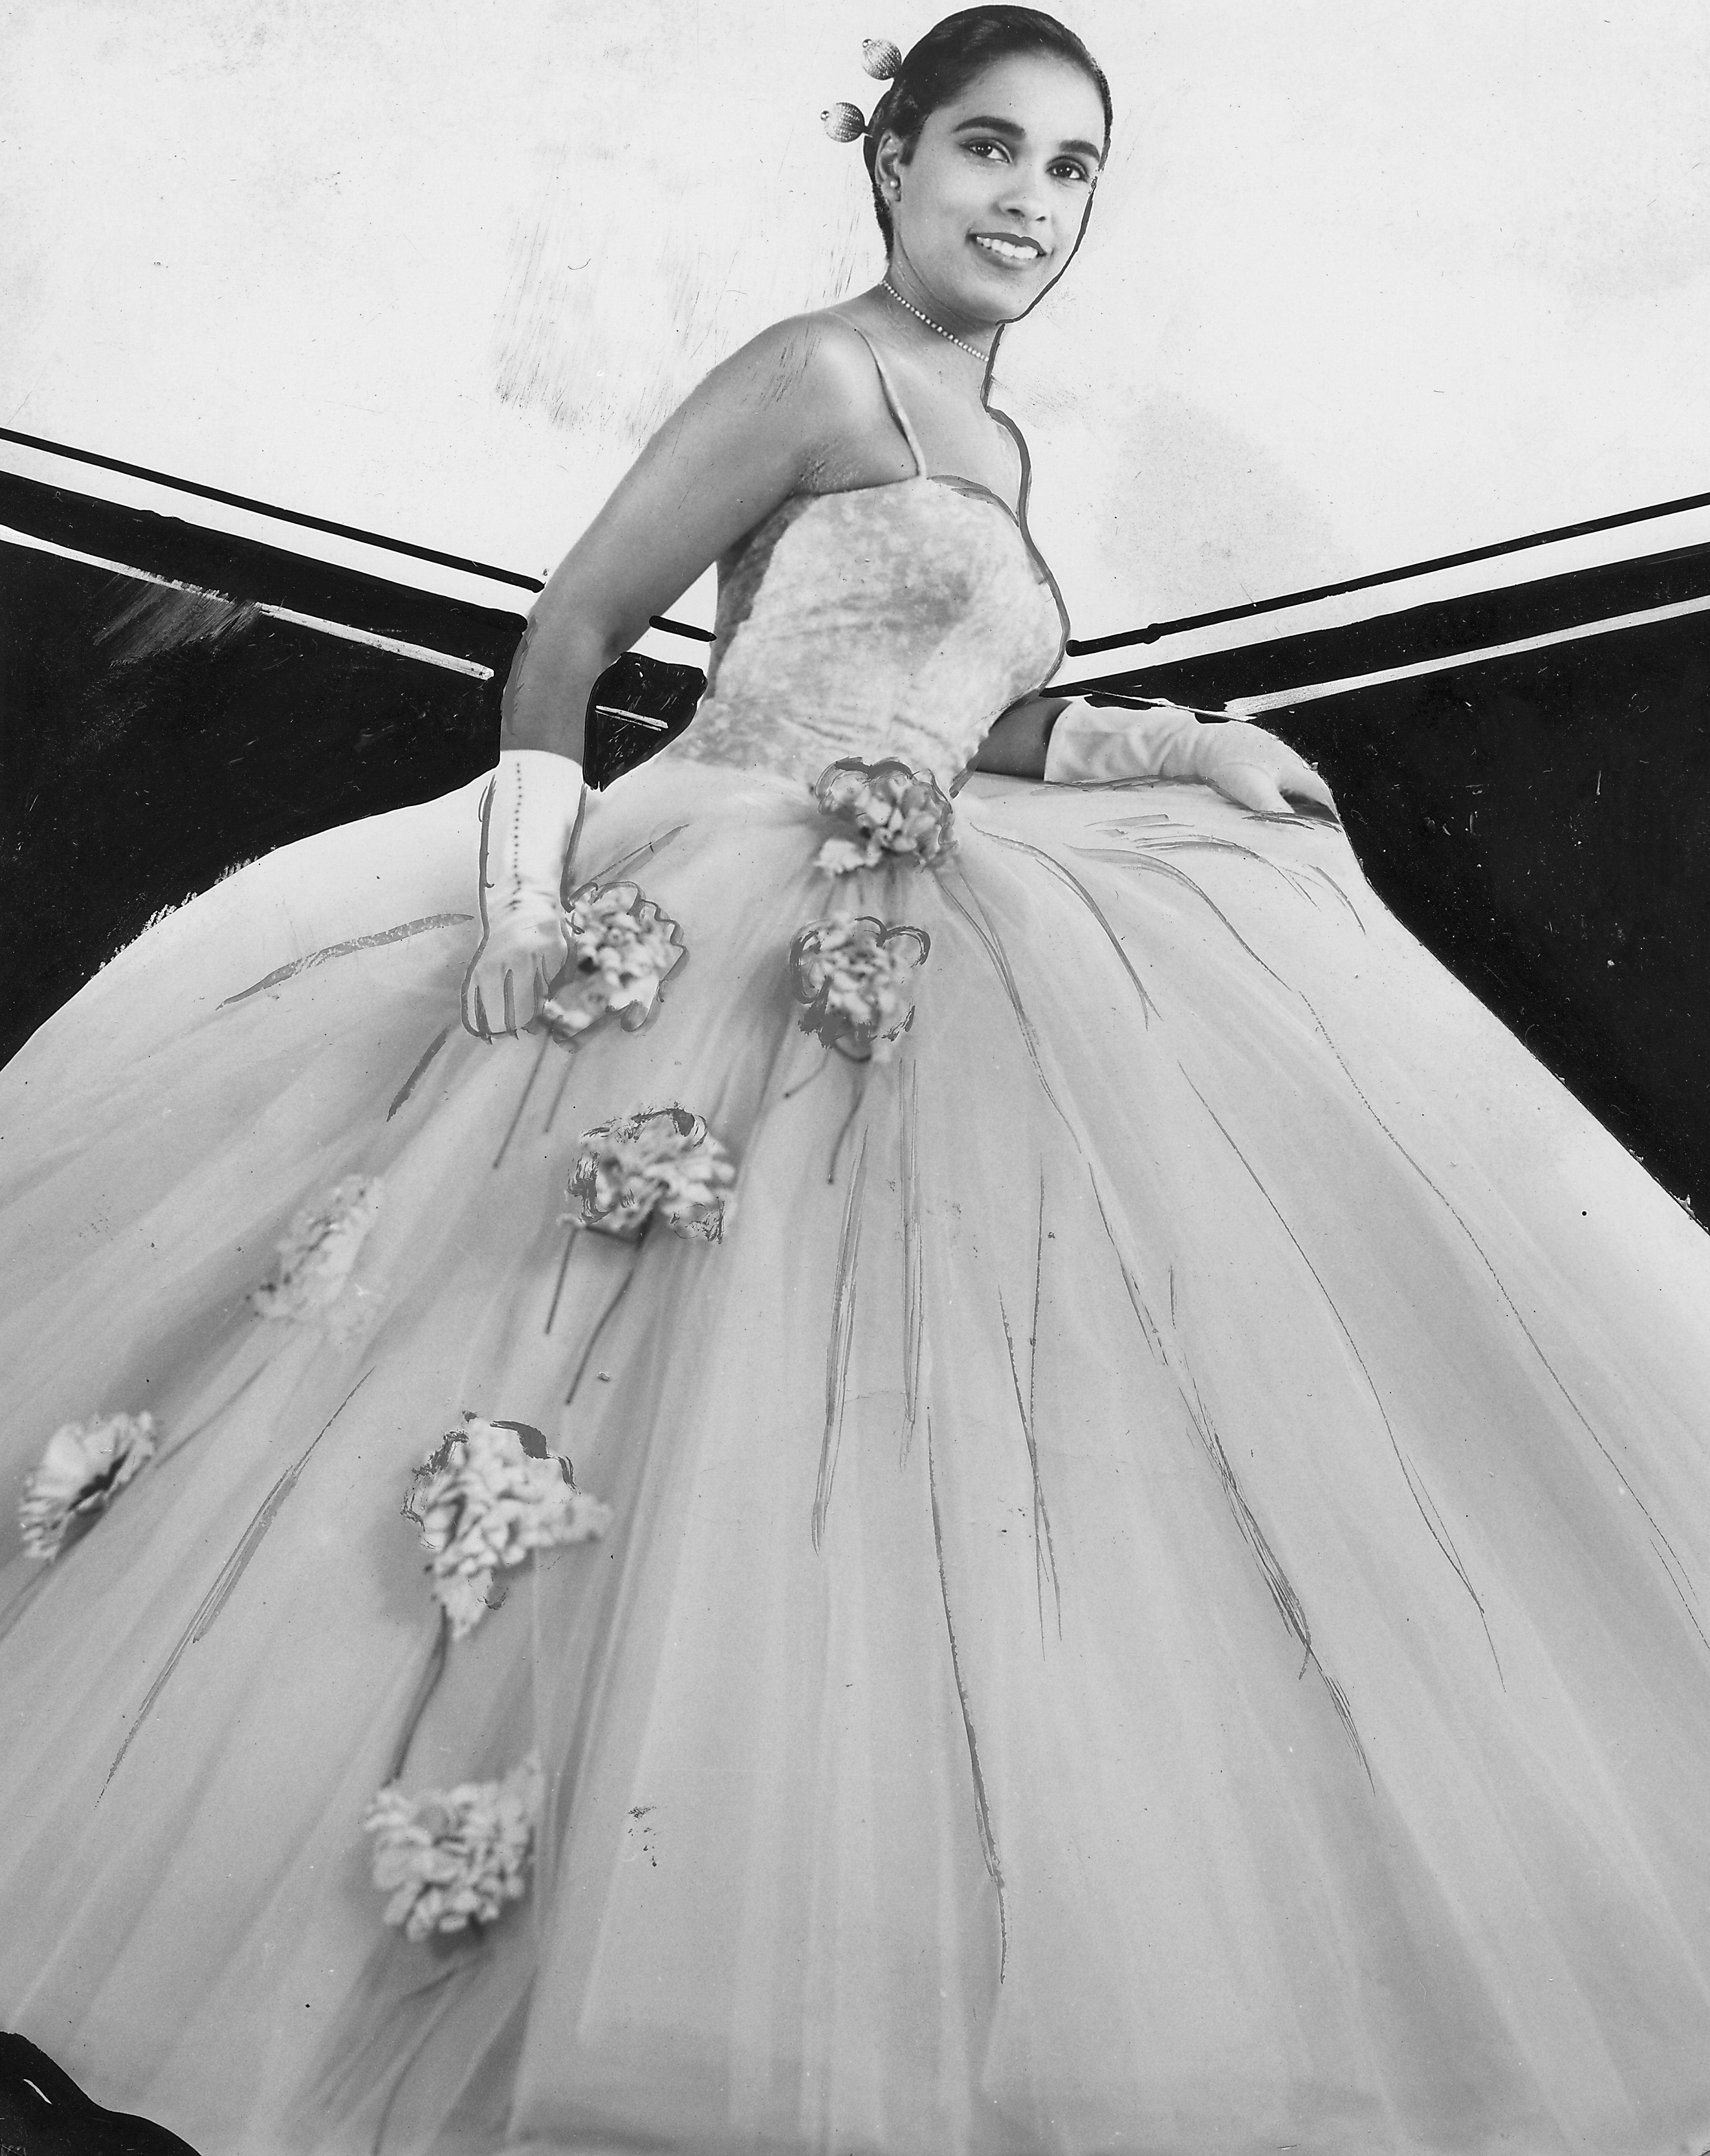 Marguerite Belafonte in a wedding dress | Source: Getty Images